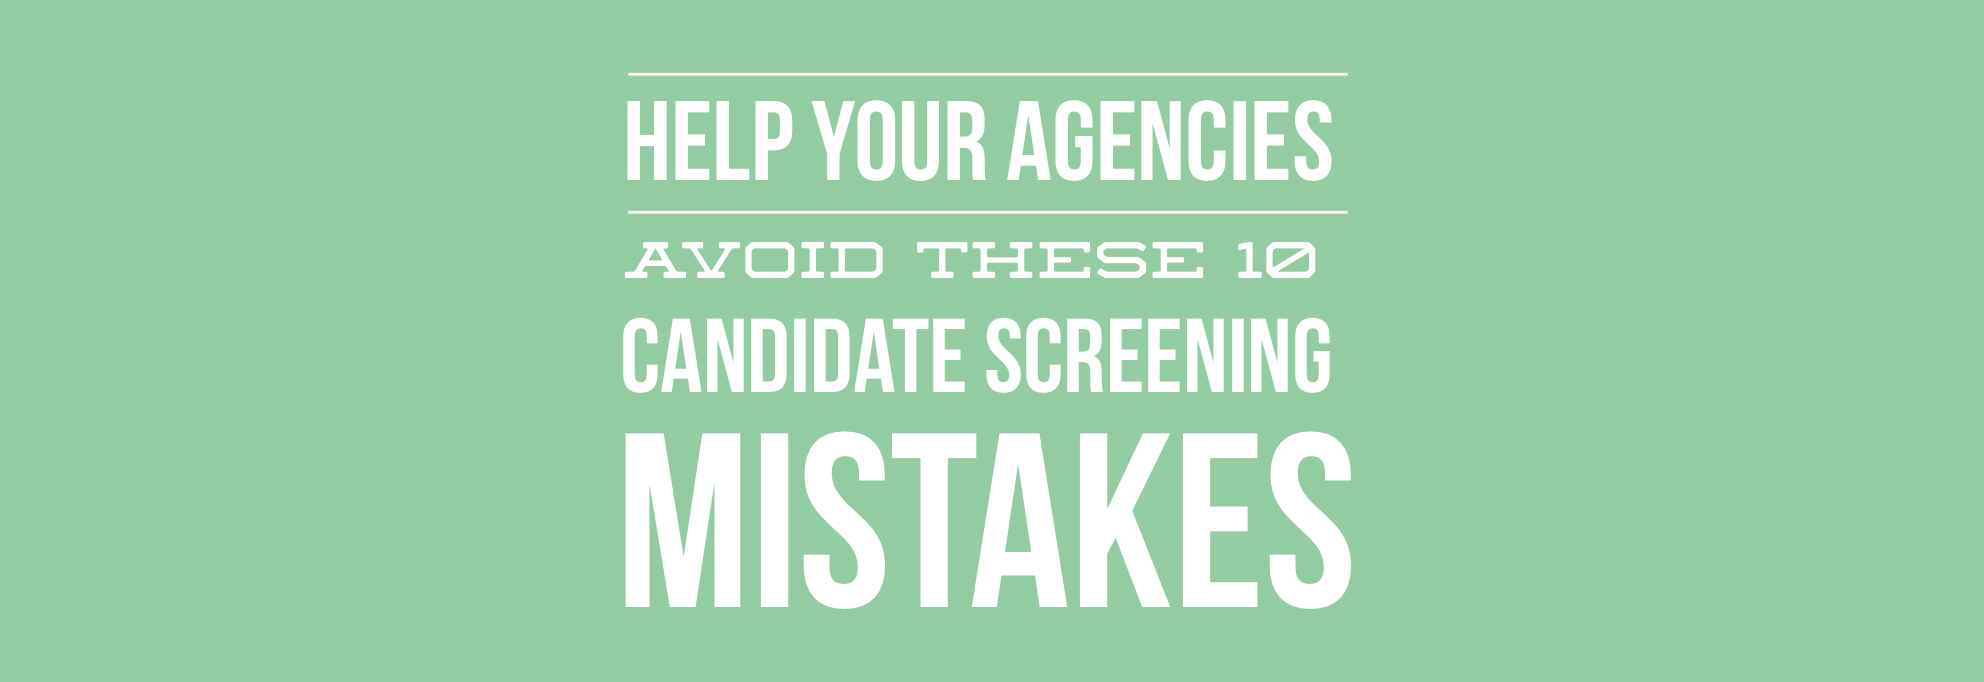 How to Help your Agencies Avoid These 10 Candidate Screening Mistakes